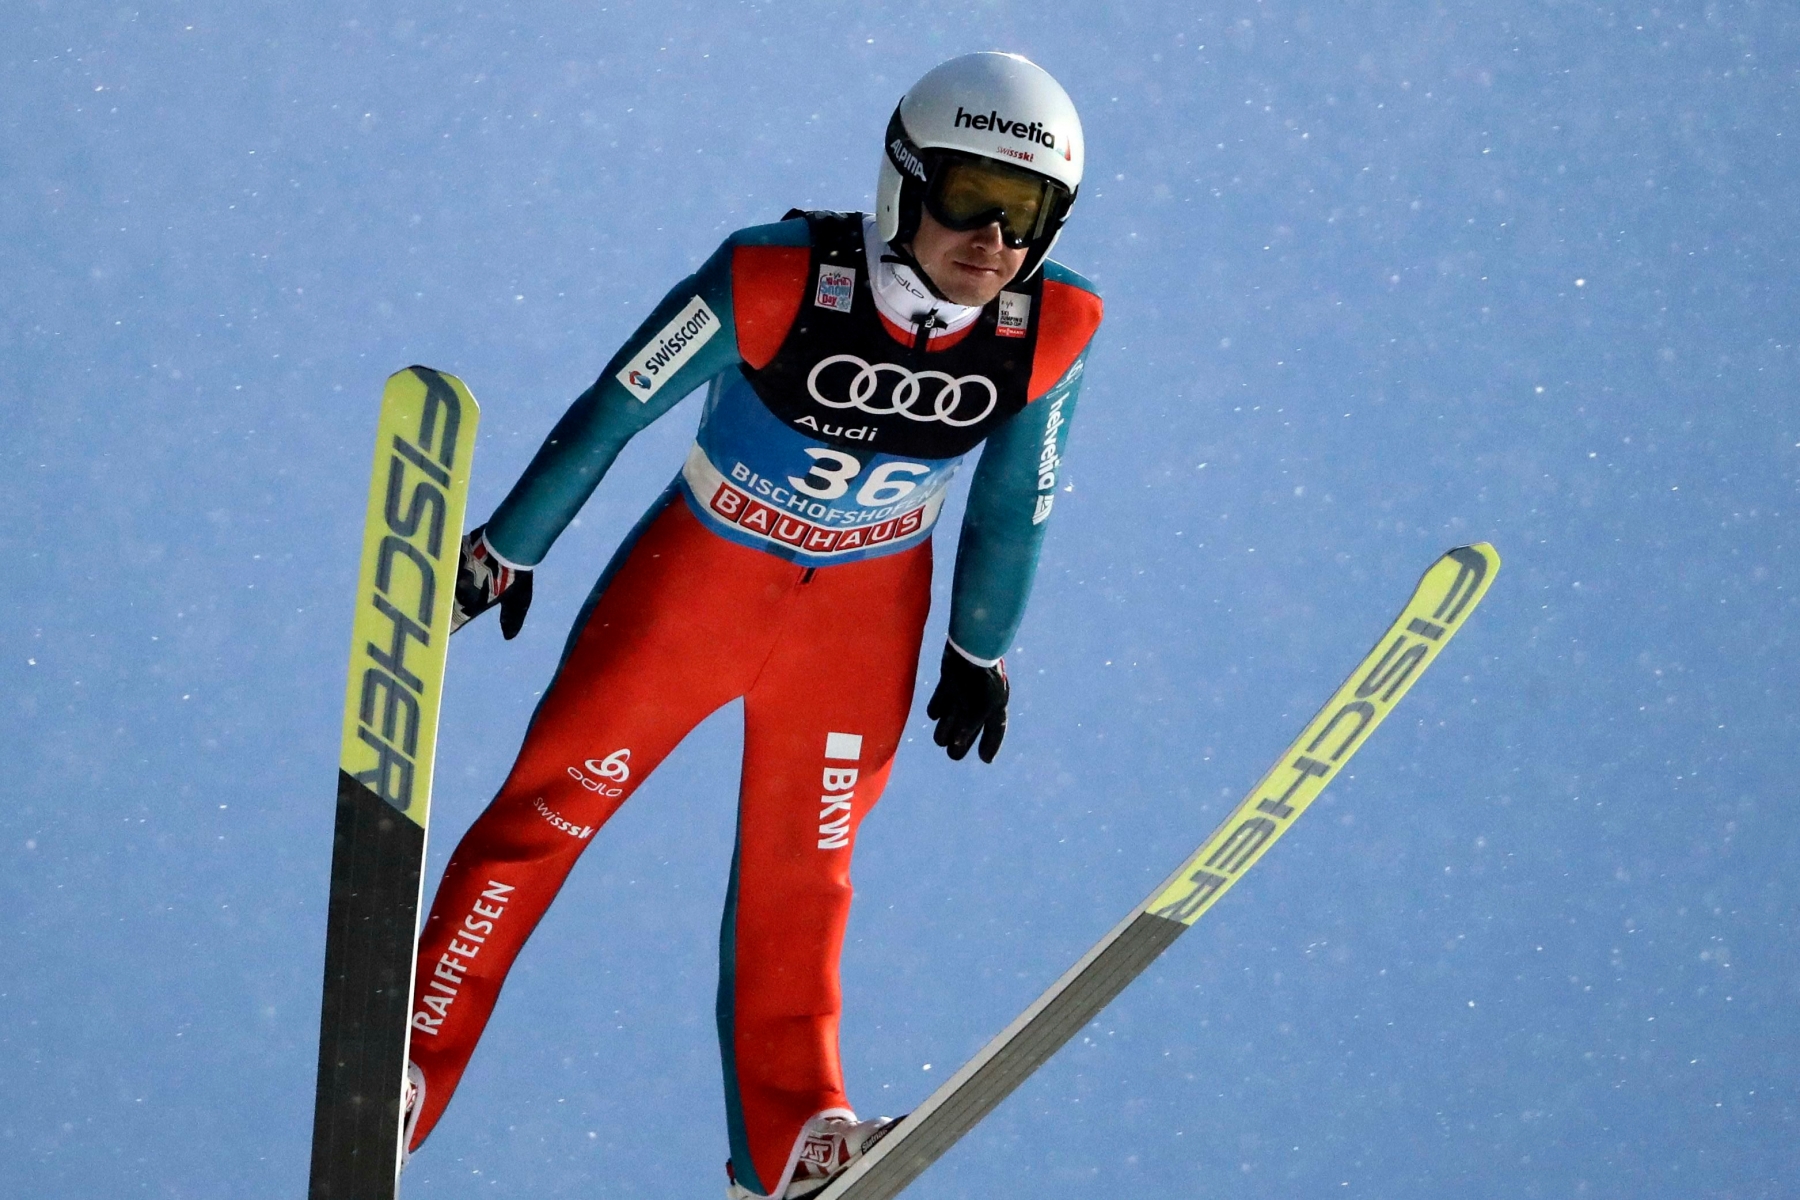 Simon Ammann of Switzerland soars through the air during his trial jump at the fourth stage of the 65th four hills ski jumping tournament in Bischofshofen, Austria, Thursday, Jan. 5, 2017. (AP Photo/Matthias Schrader) AUSTRIA SKI JUMPING FOUR HILLS